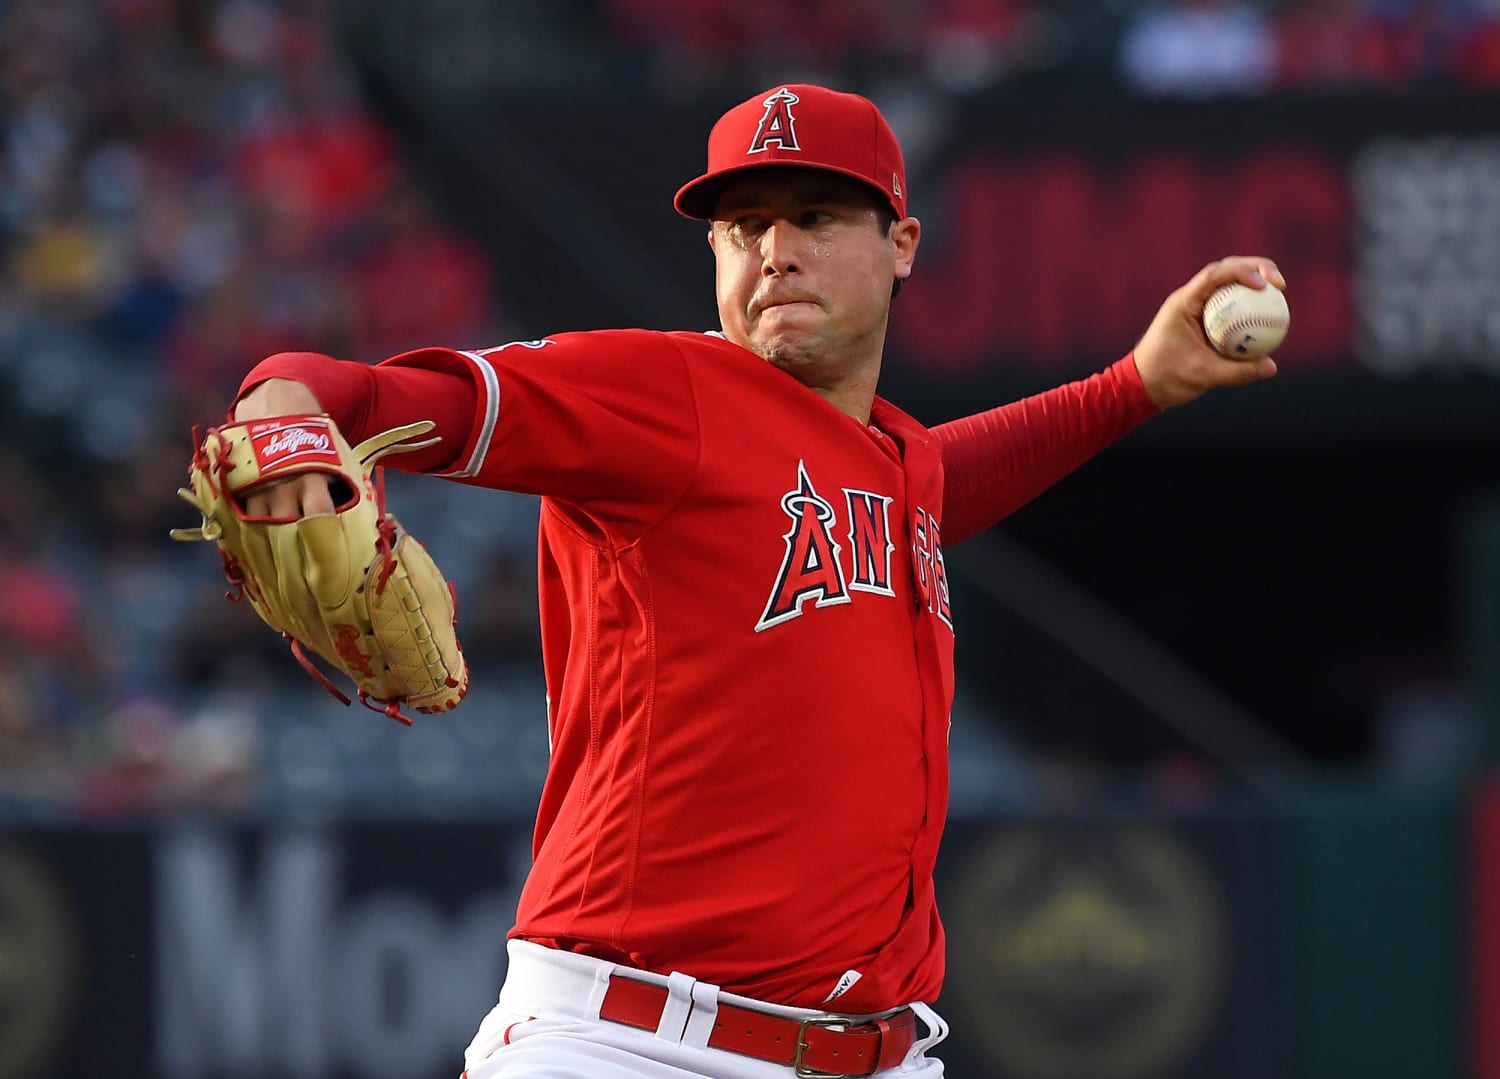 Angels return to Texas a sad reminder of Tyler Skaggs' death - Los Angeles  Times